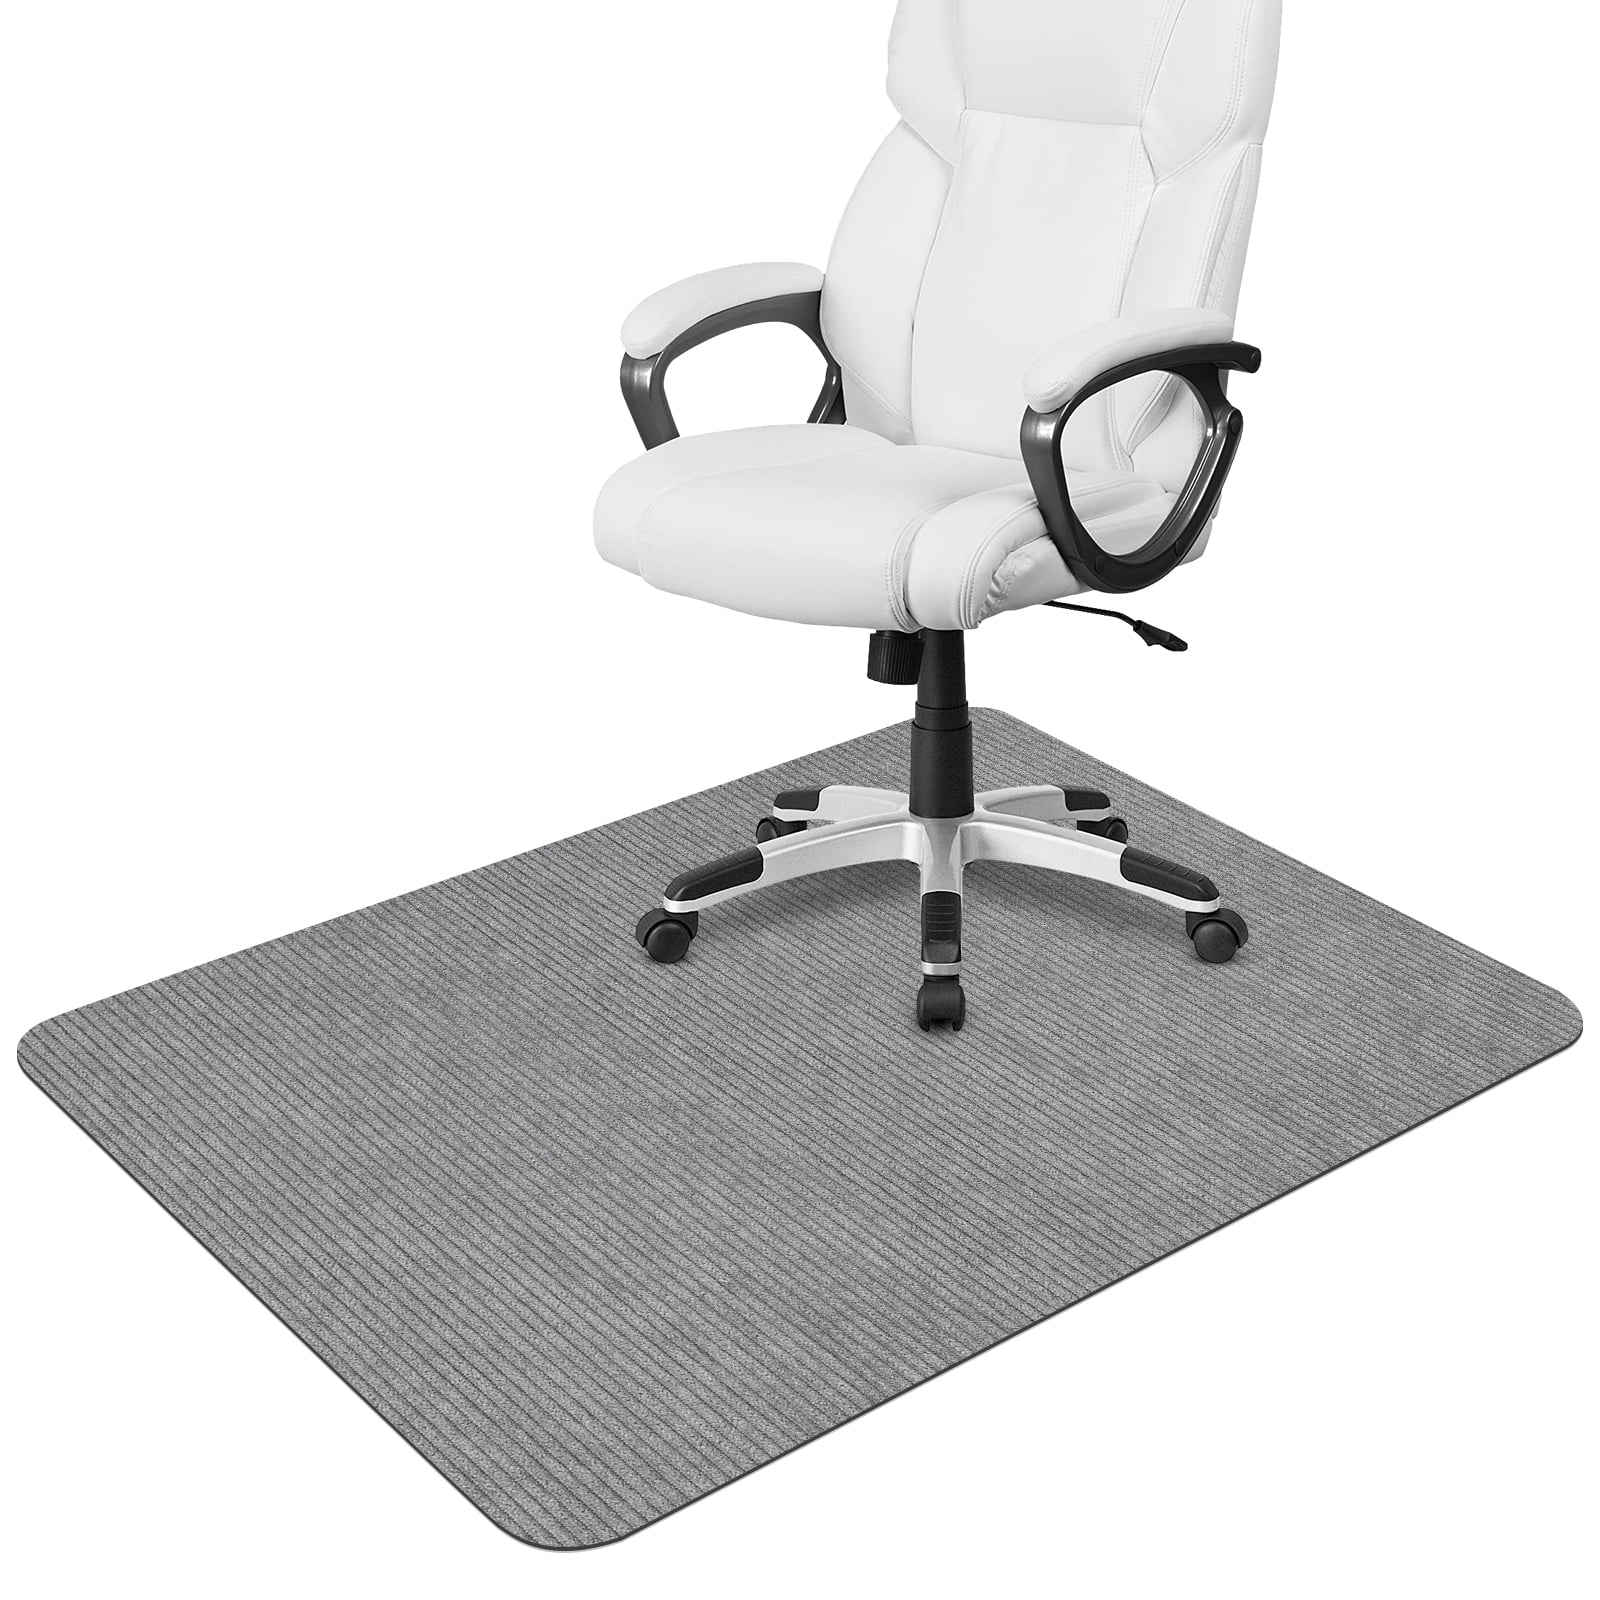 Grey Office Floor Mat, Thickness: 8 - 10 Mm at Rs 105/square feet